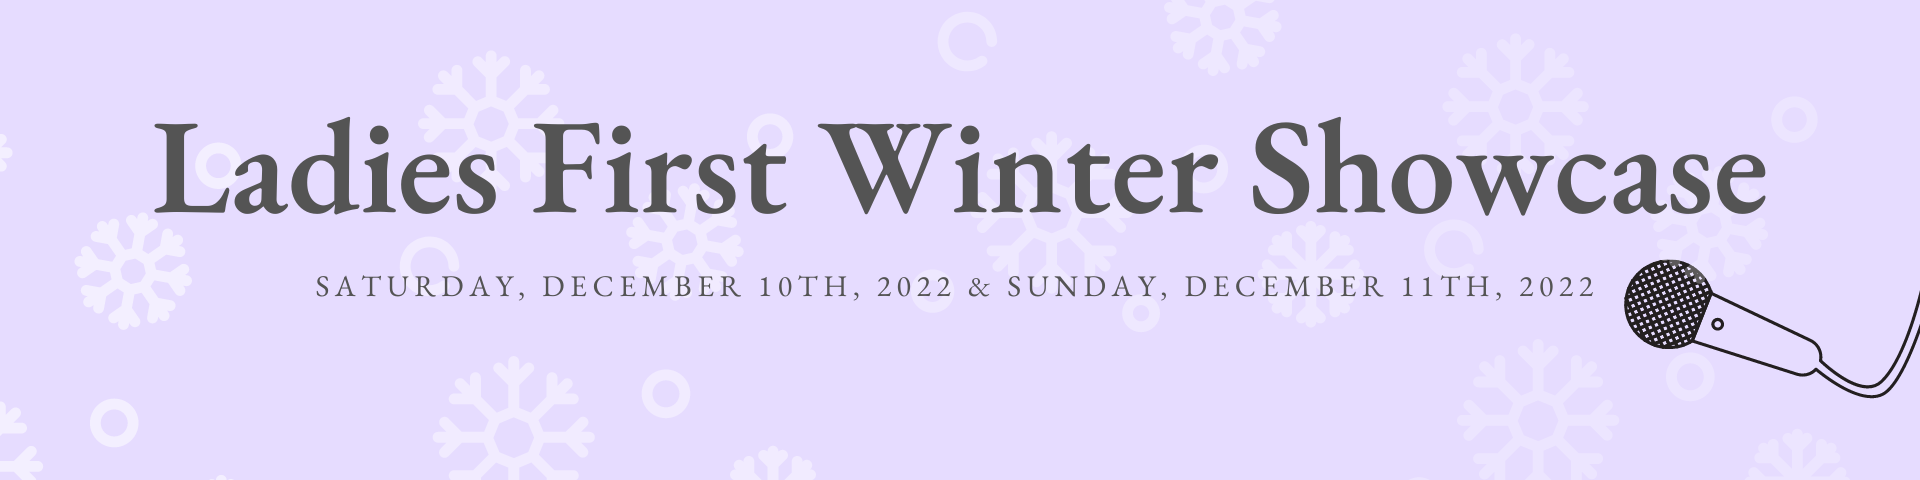 Header - Ladies First Winter Showcase. background with snowflakes and a microphone